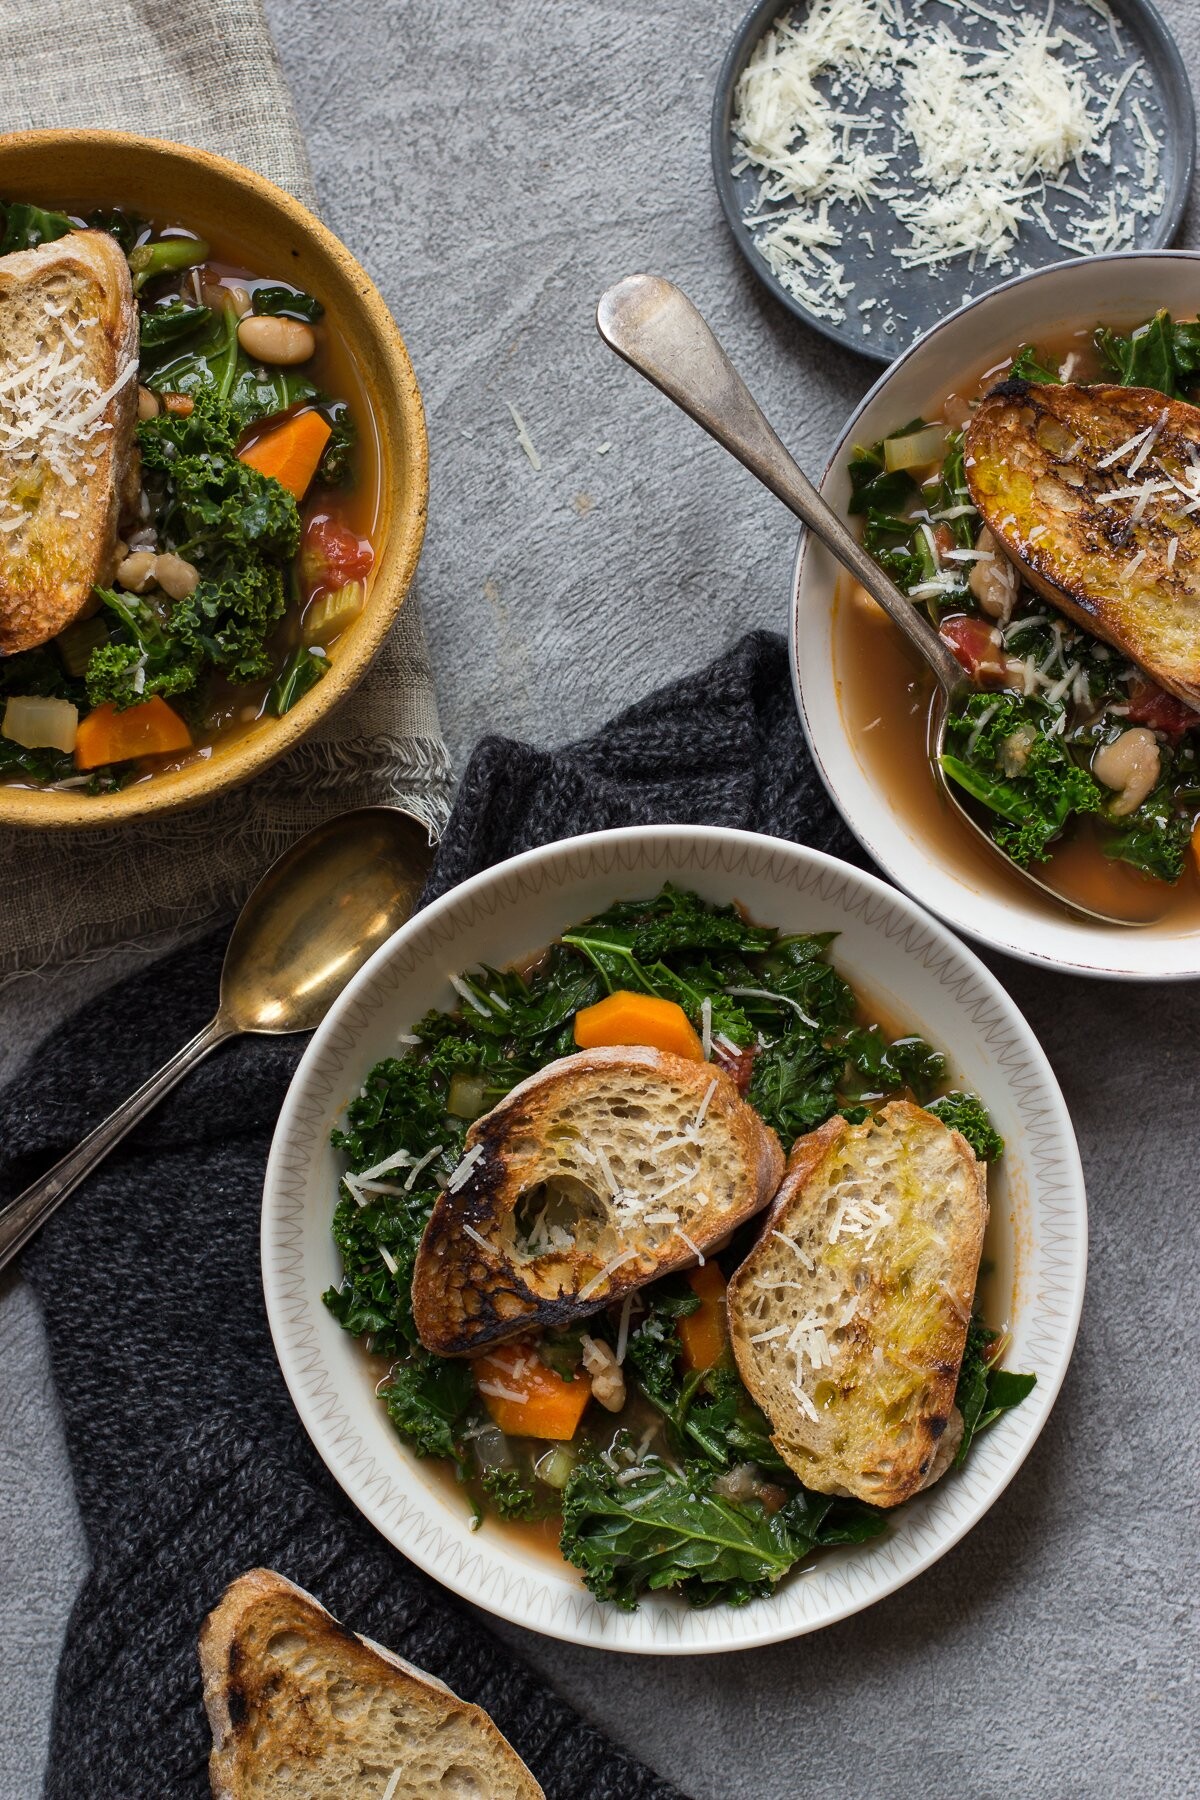 This is my quick and easy twist on famous Toscan soup - ribollita. I made it with cannelini beans, tomatoes and kale and served with parmesan garlic toasted bread.  The idea behind this picture was to make it look rustic and autumnal. 